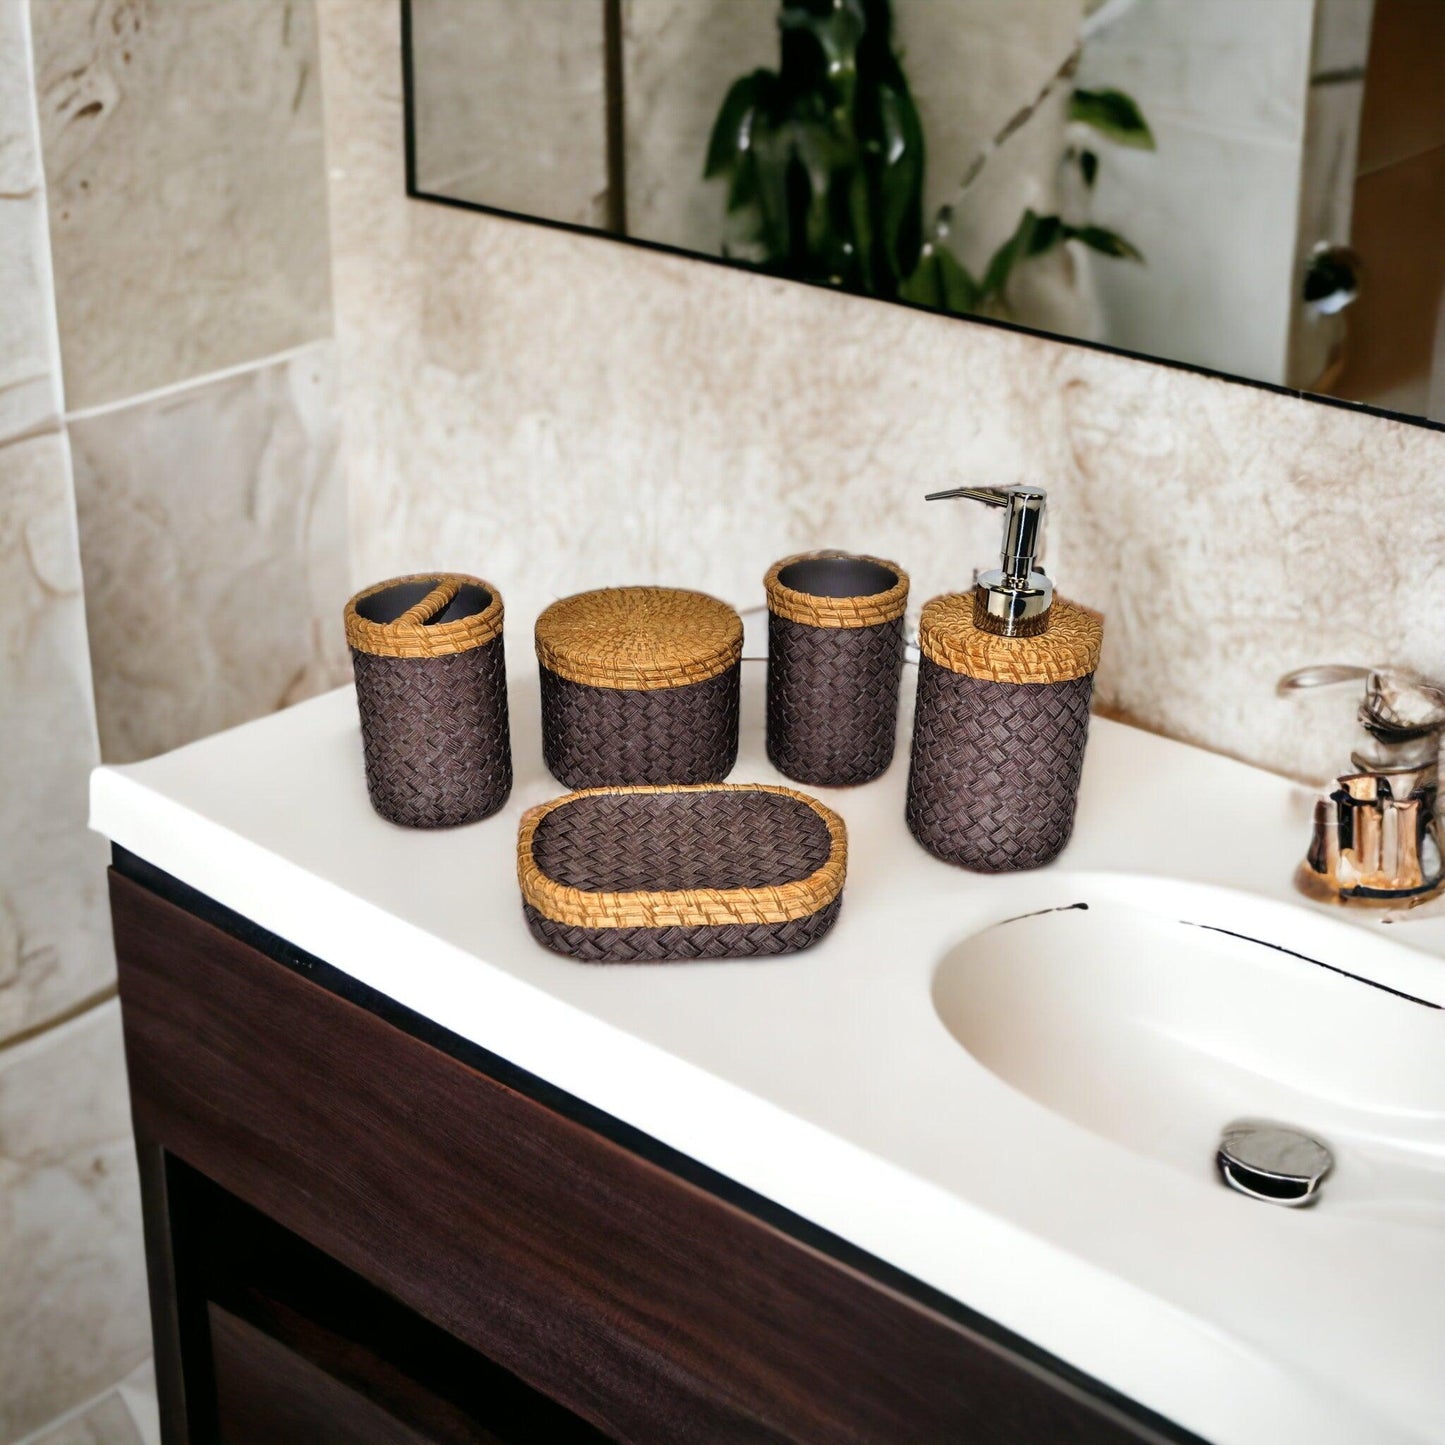 Bathroom Accessories Set of Brown and Purple Weave Design - Nature Home Decor